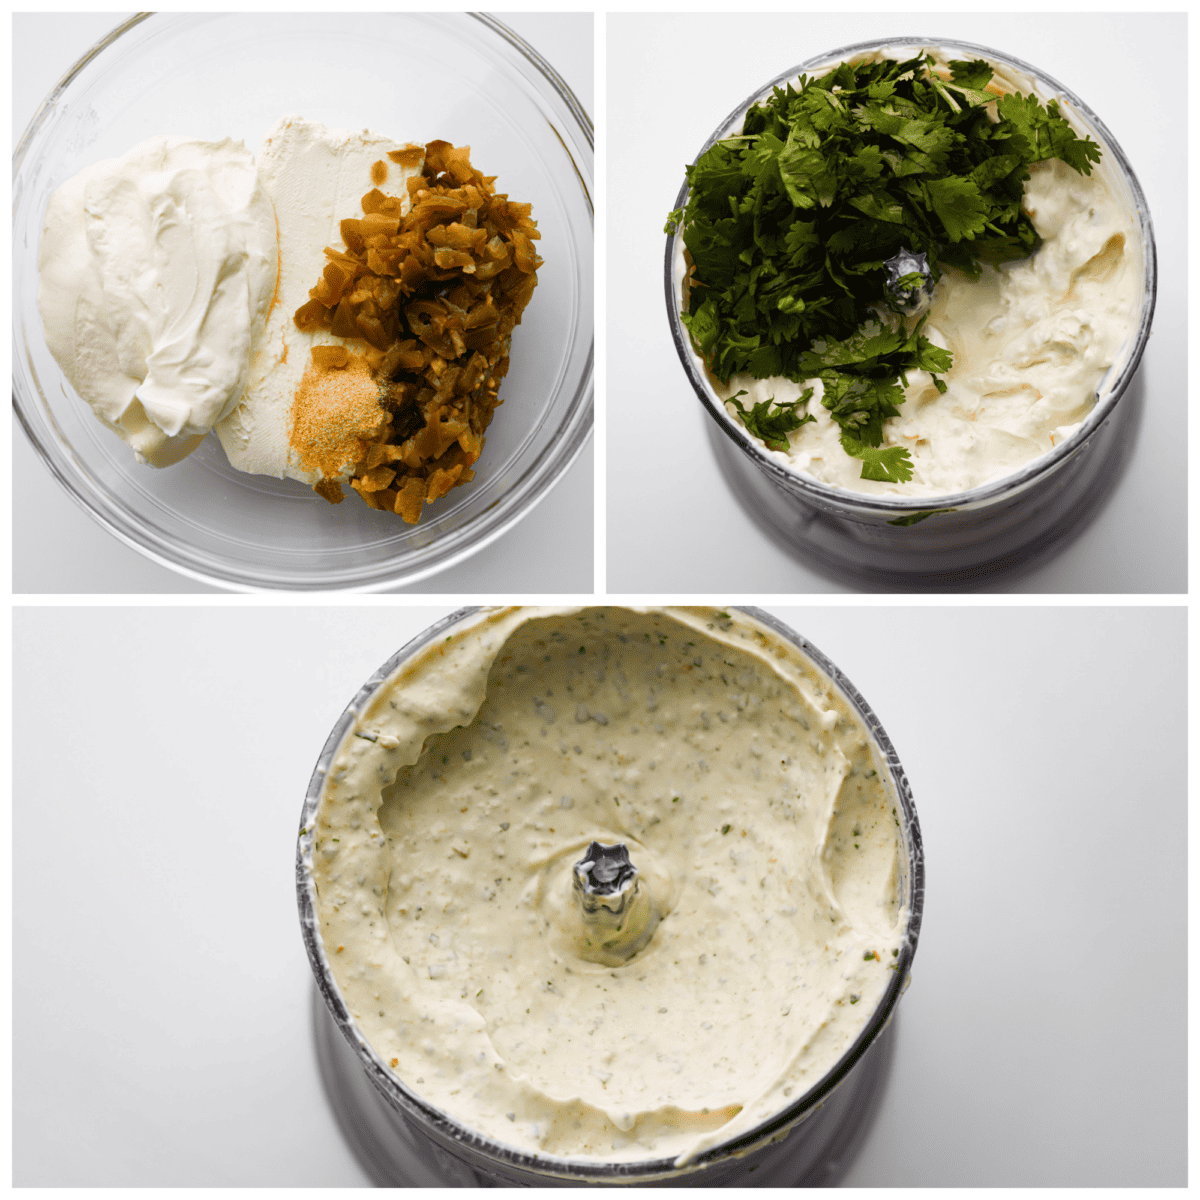 3 pictures showing how to add the ingredients to a food processor and then blending it. 